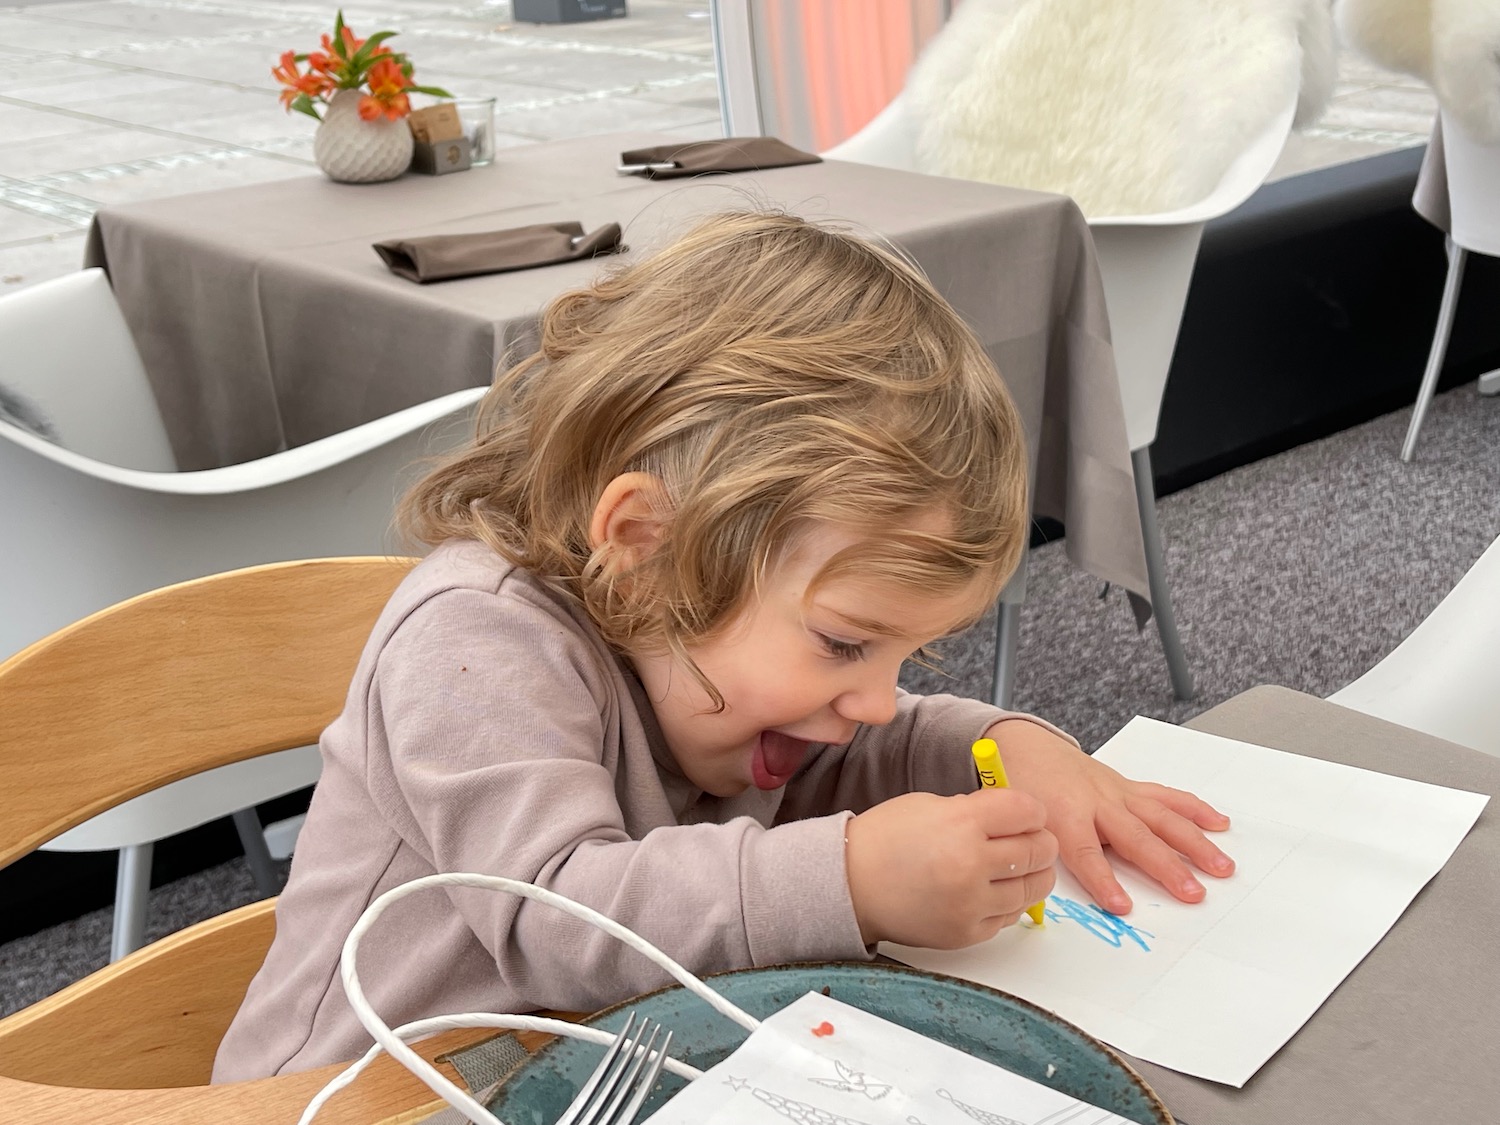 a child sitting at a table drawing with a yellow crayon